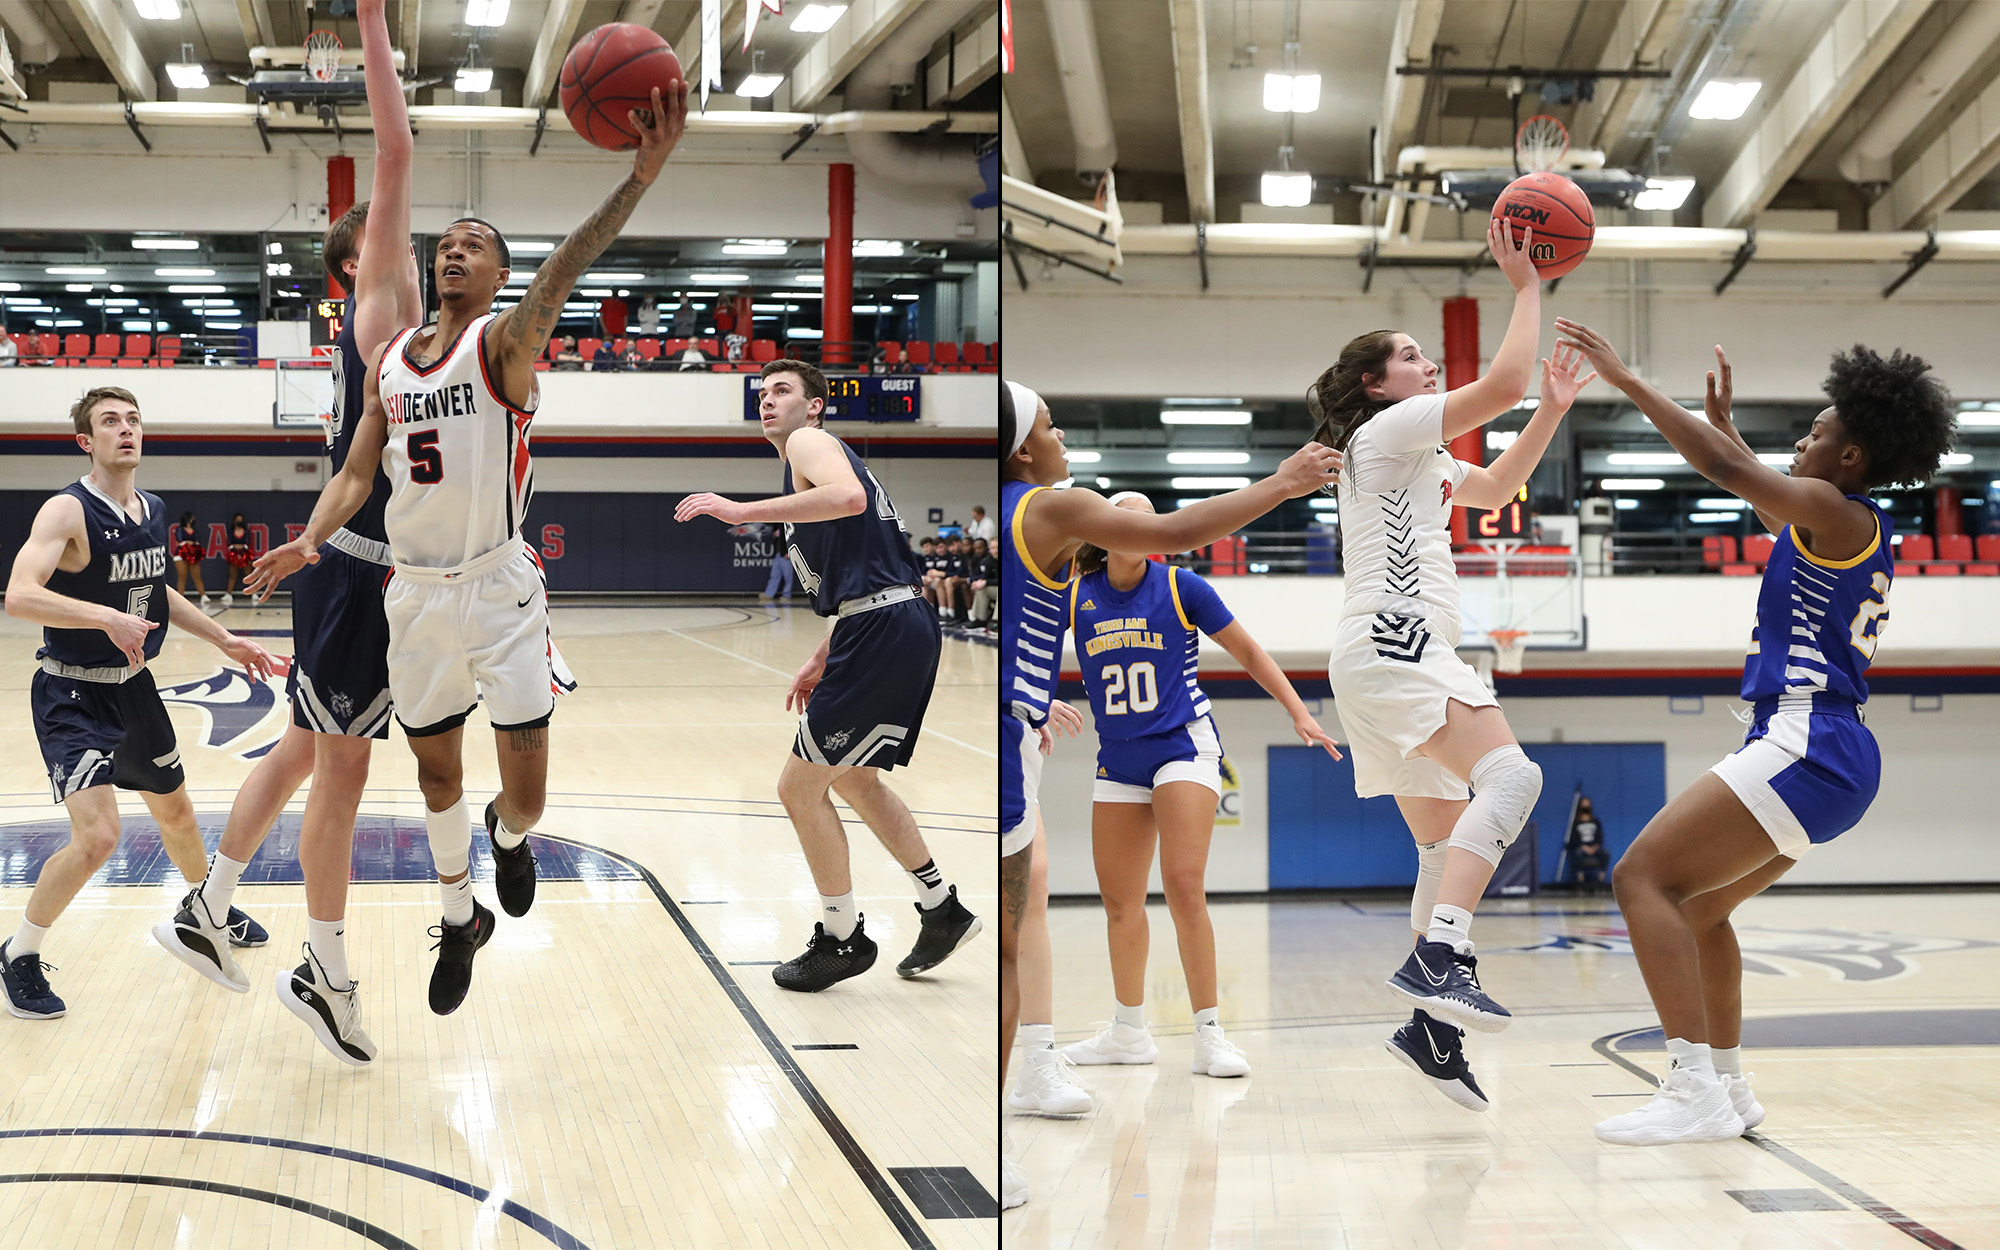 Split image with men's basketball player Tyrei Randall going for a layup through several defenders and women's basketball player Kendra Parra shooting a floater in the lane between two defenders.